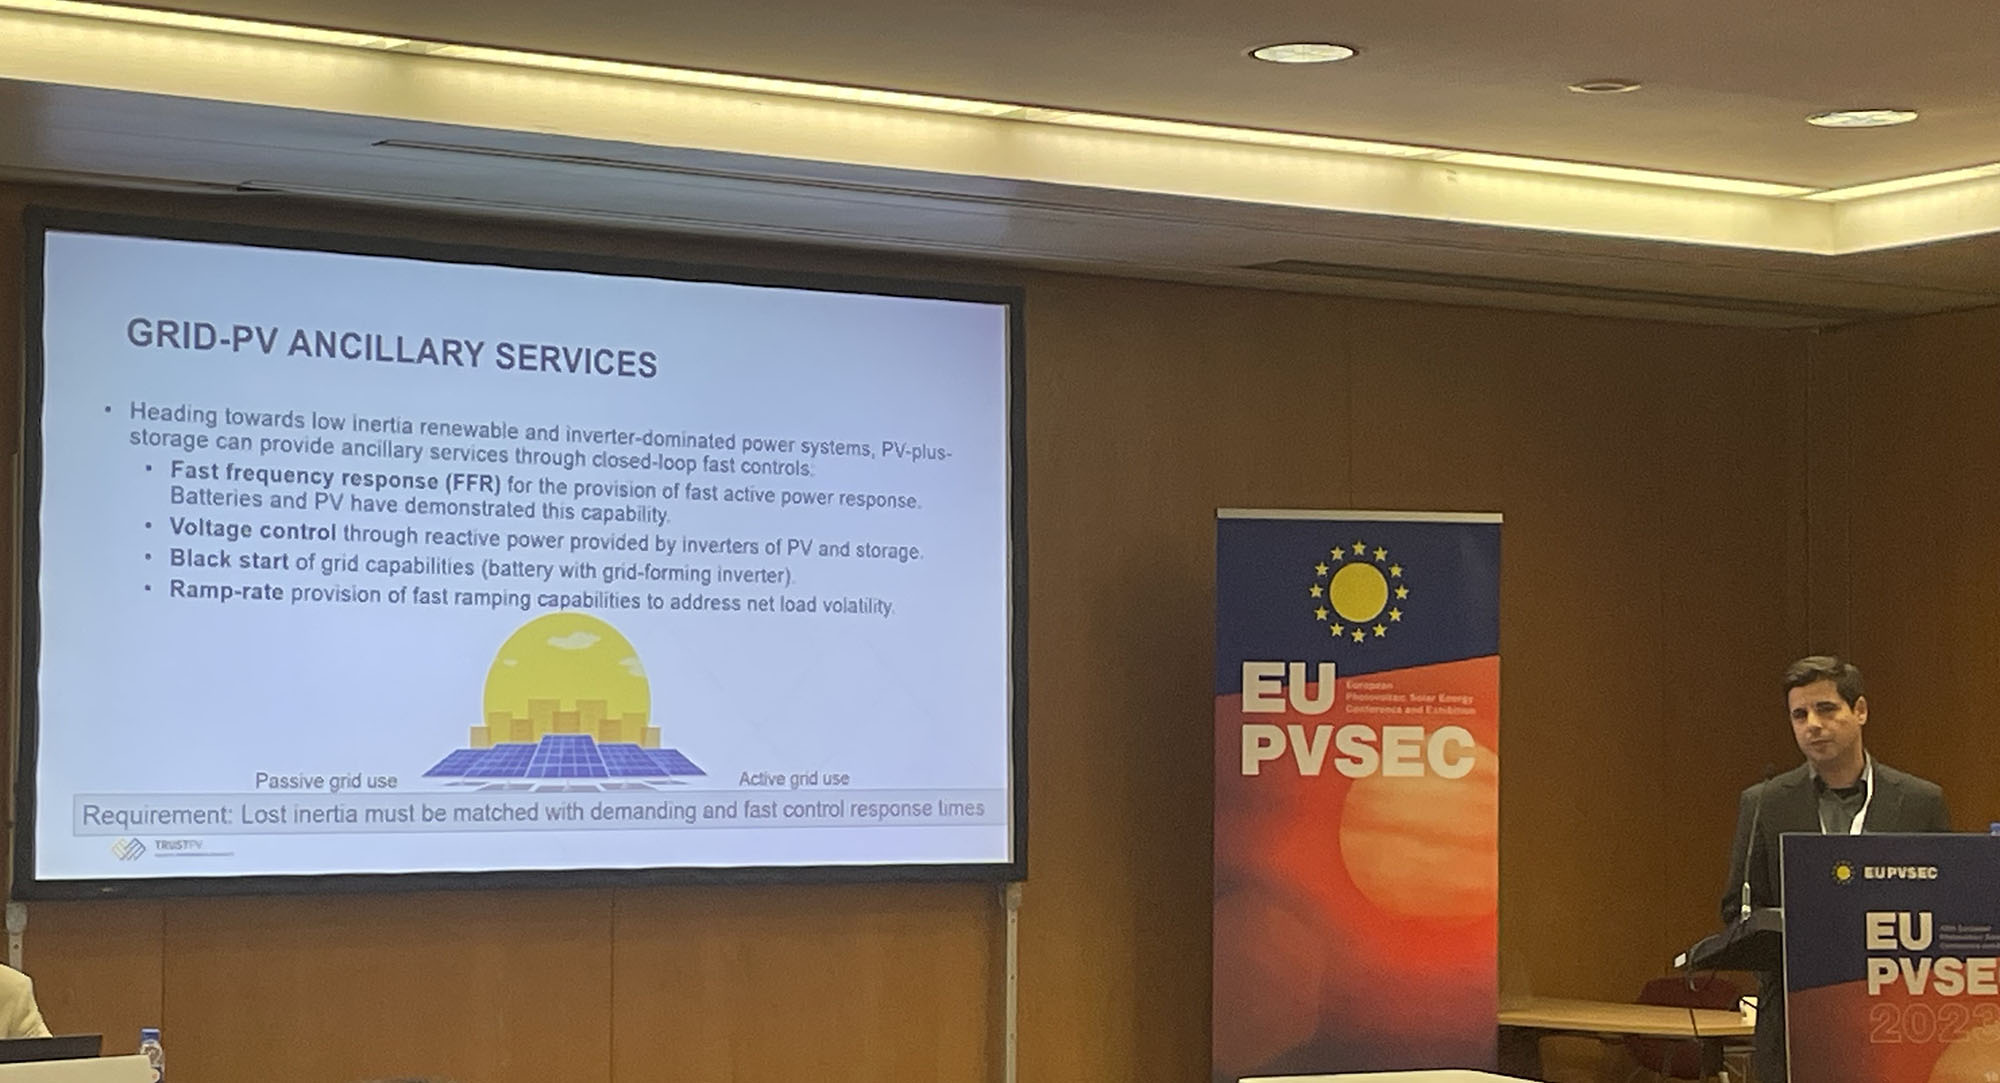 Dr. George Makrides presented on grid stability and ancillary services in distributed systems at a Parallel Event of the 40th EU PVSEC